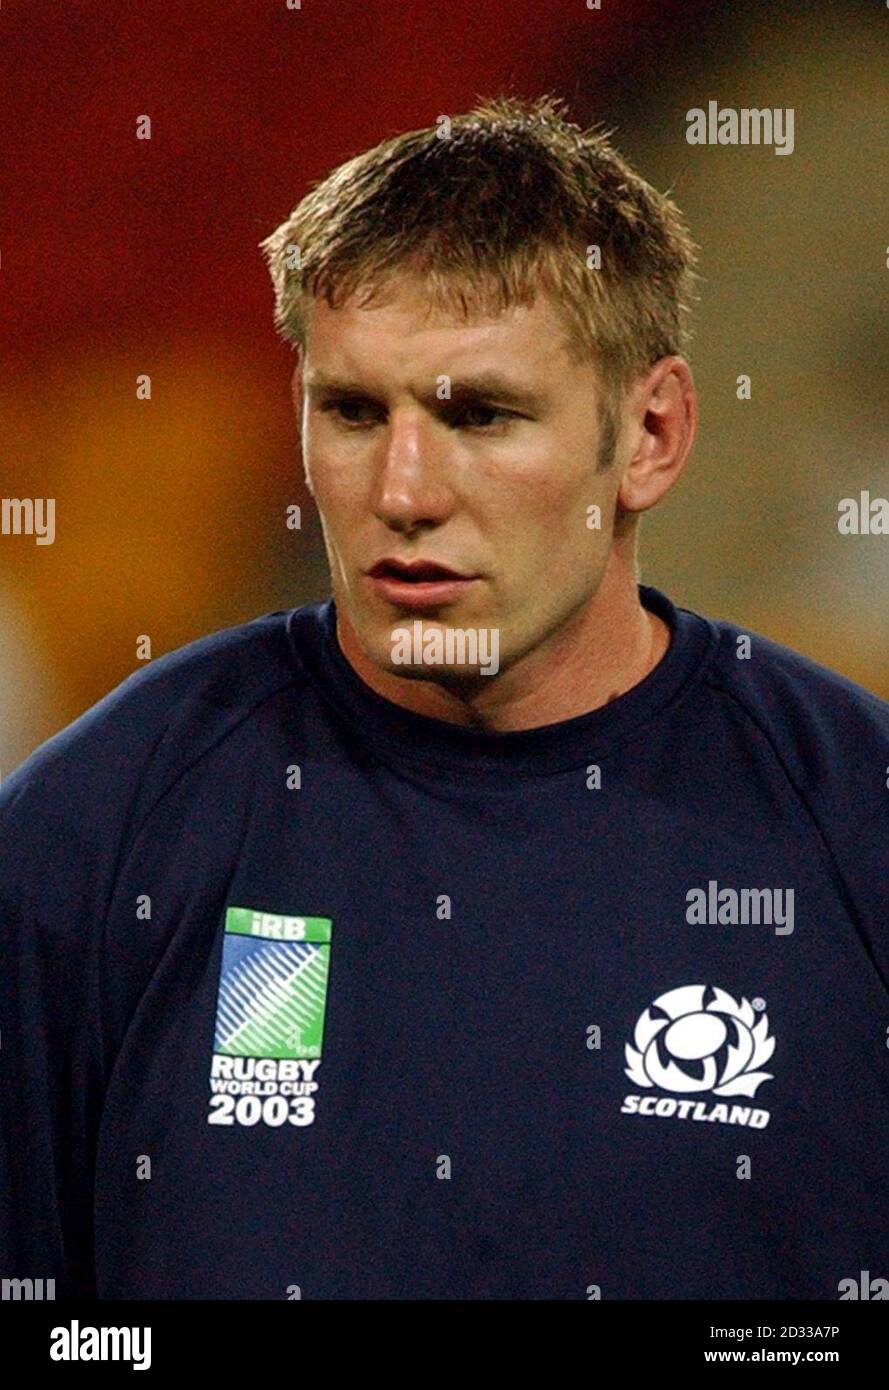 Andrew Kerr of Scotland during the Rugby World Cup 2003 in Australia. Stock Photo